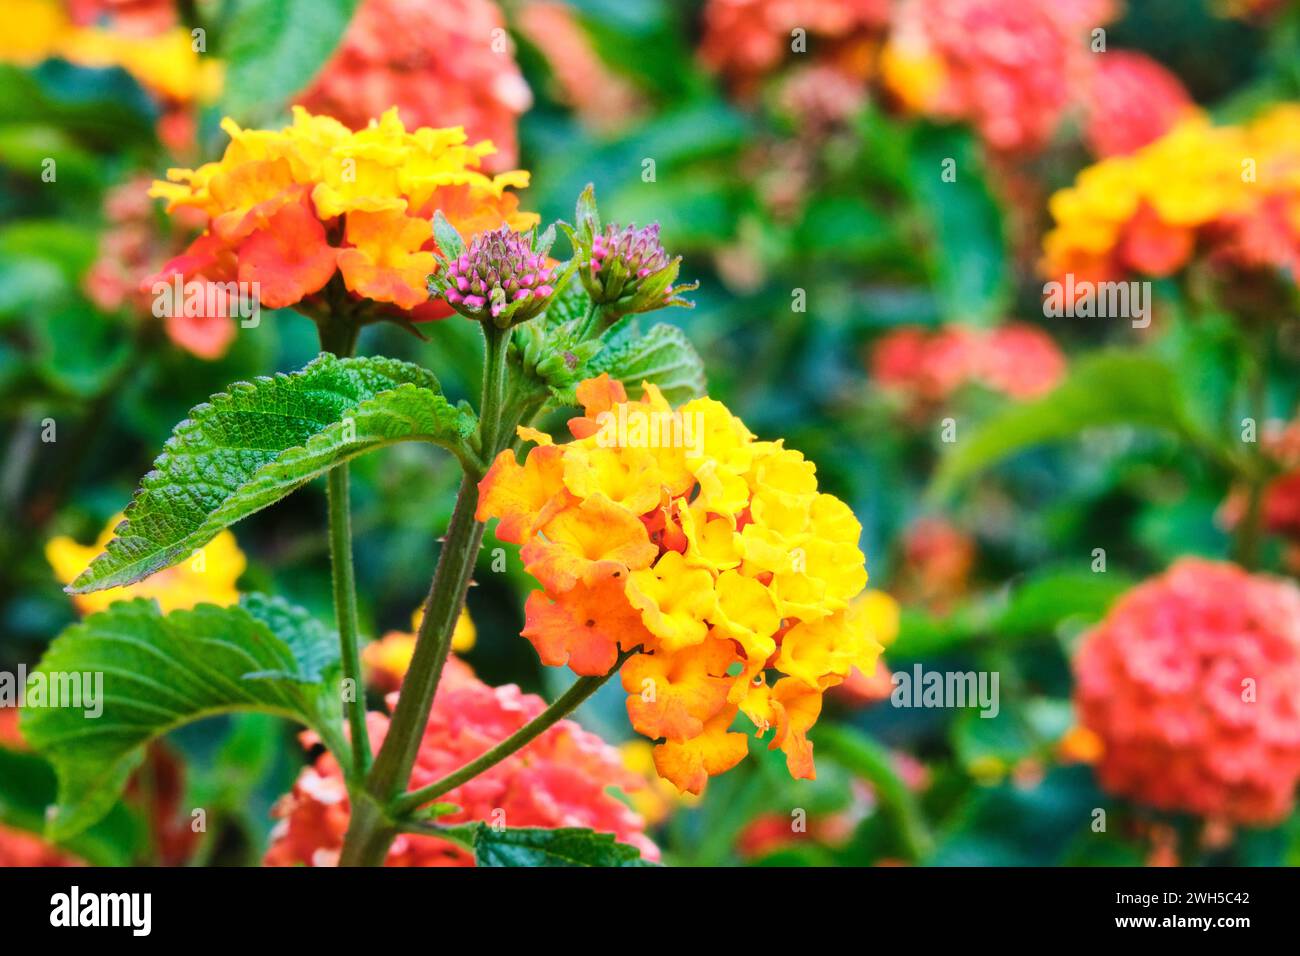 A close-up of Common Lantana, Lantana camara, with yellow and orange flowers and pink buds, a flowering plant in the verbena family. Stock Photo